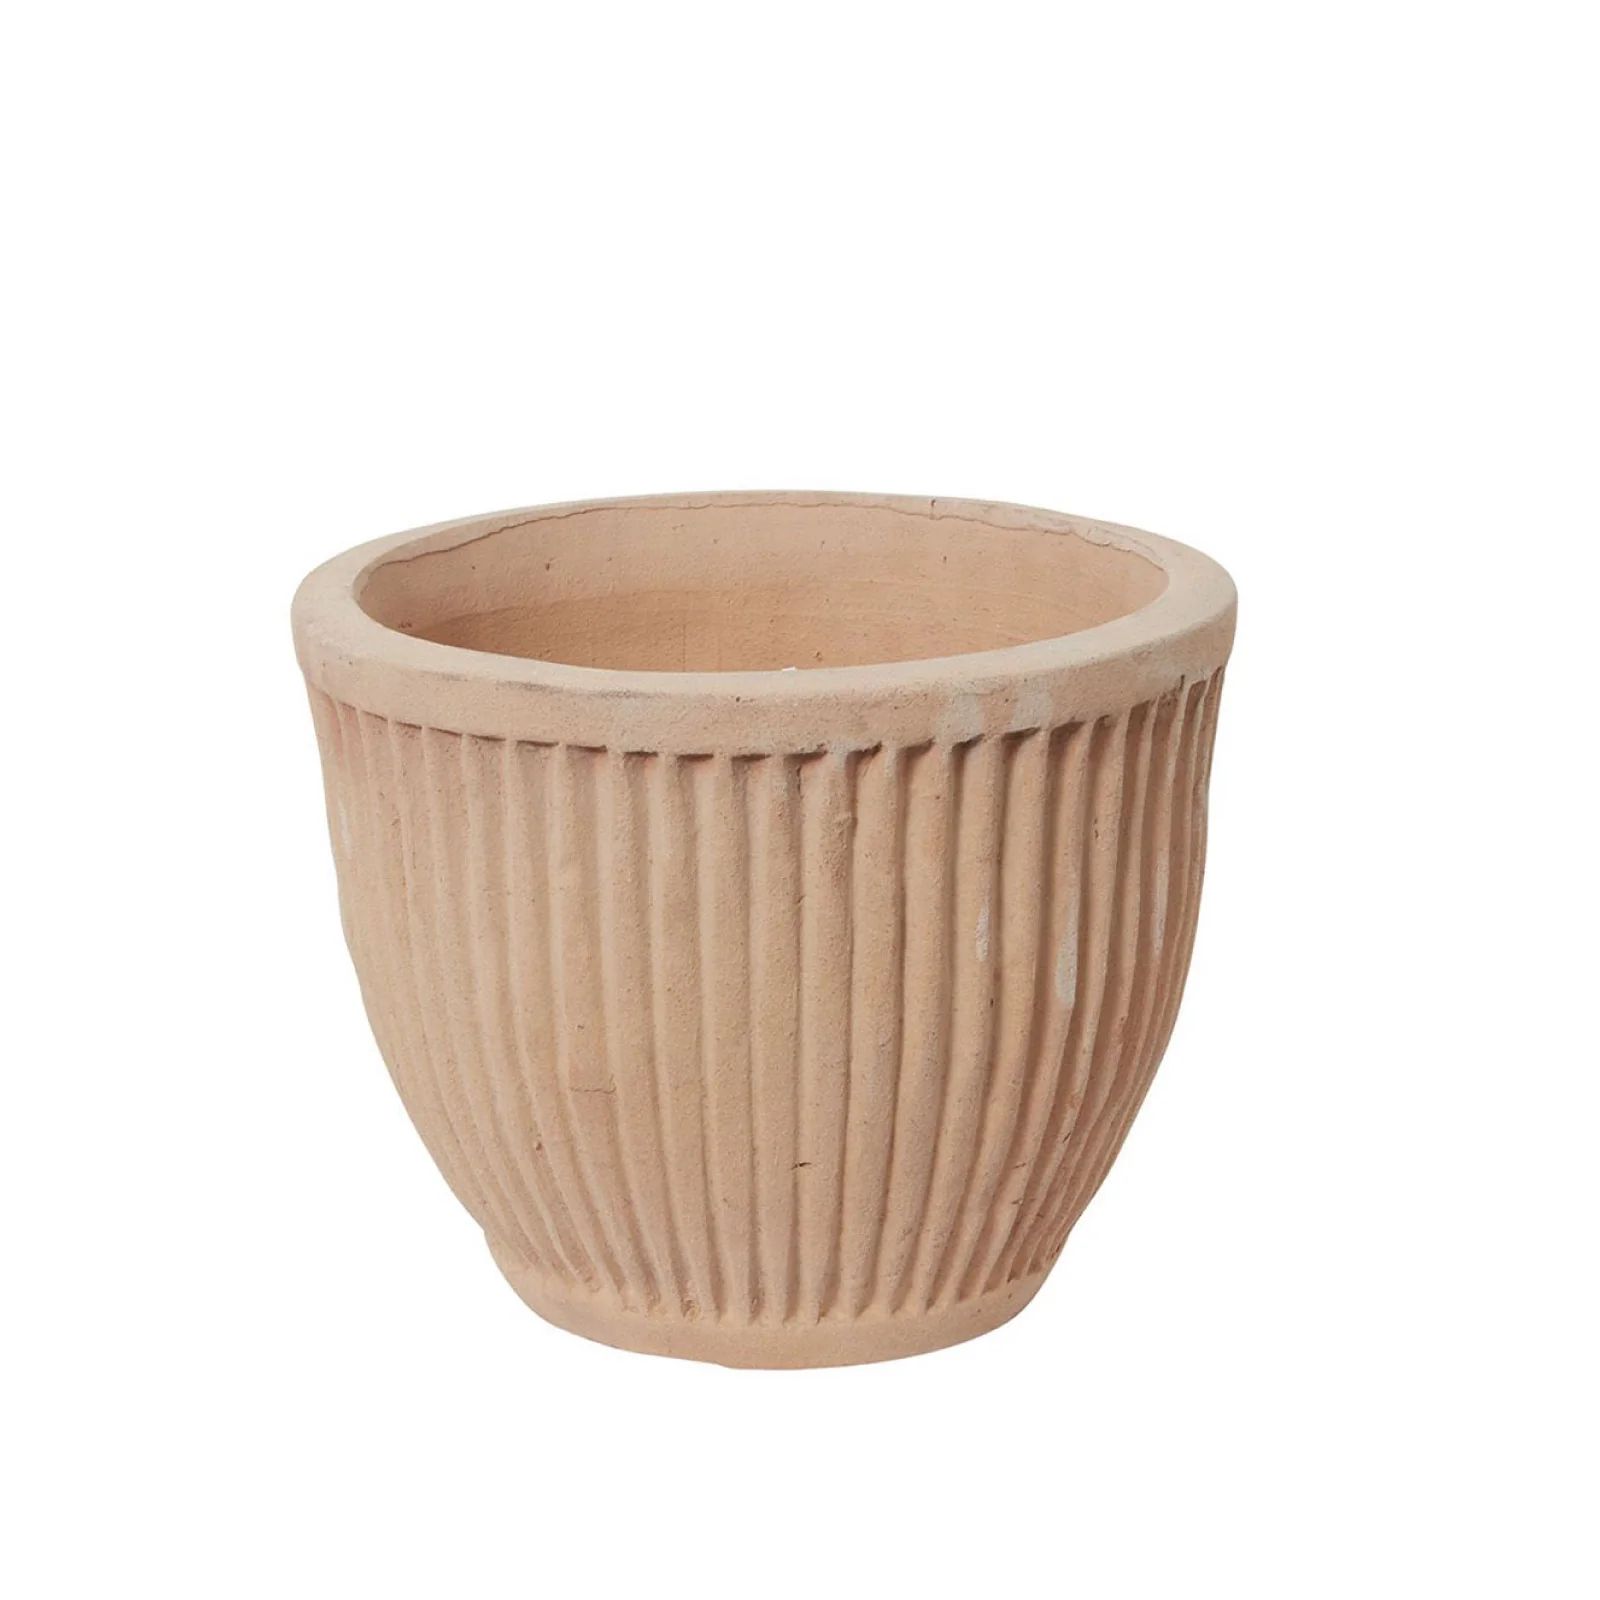 Reeded Terracotta Pot - Large | Brooke and Lou